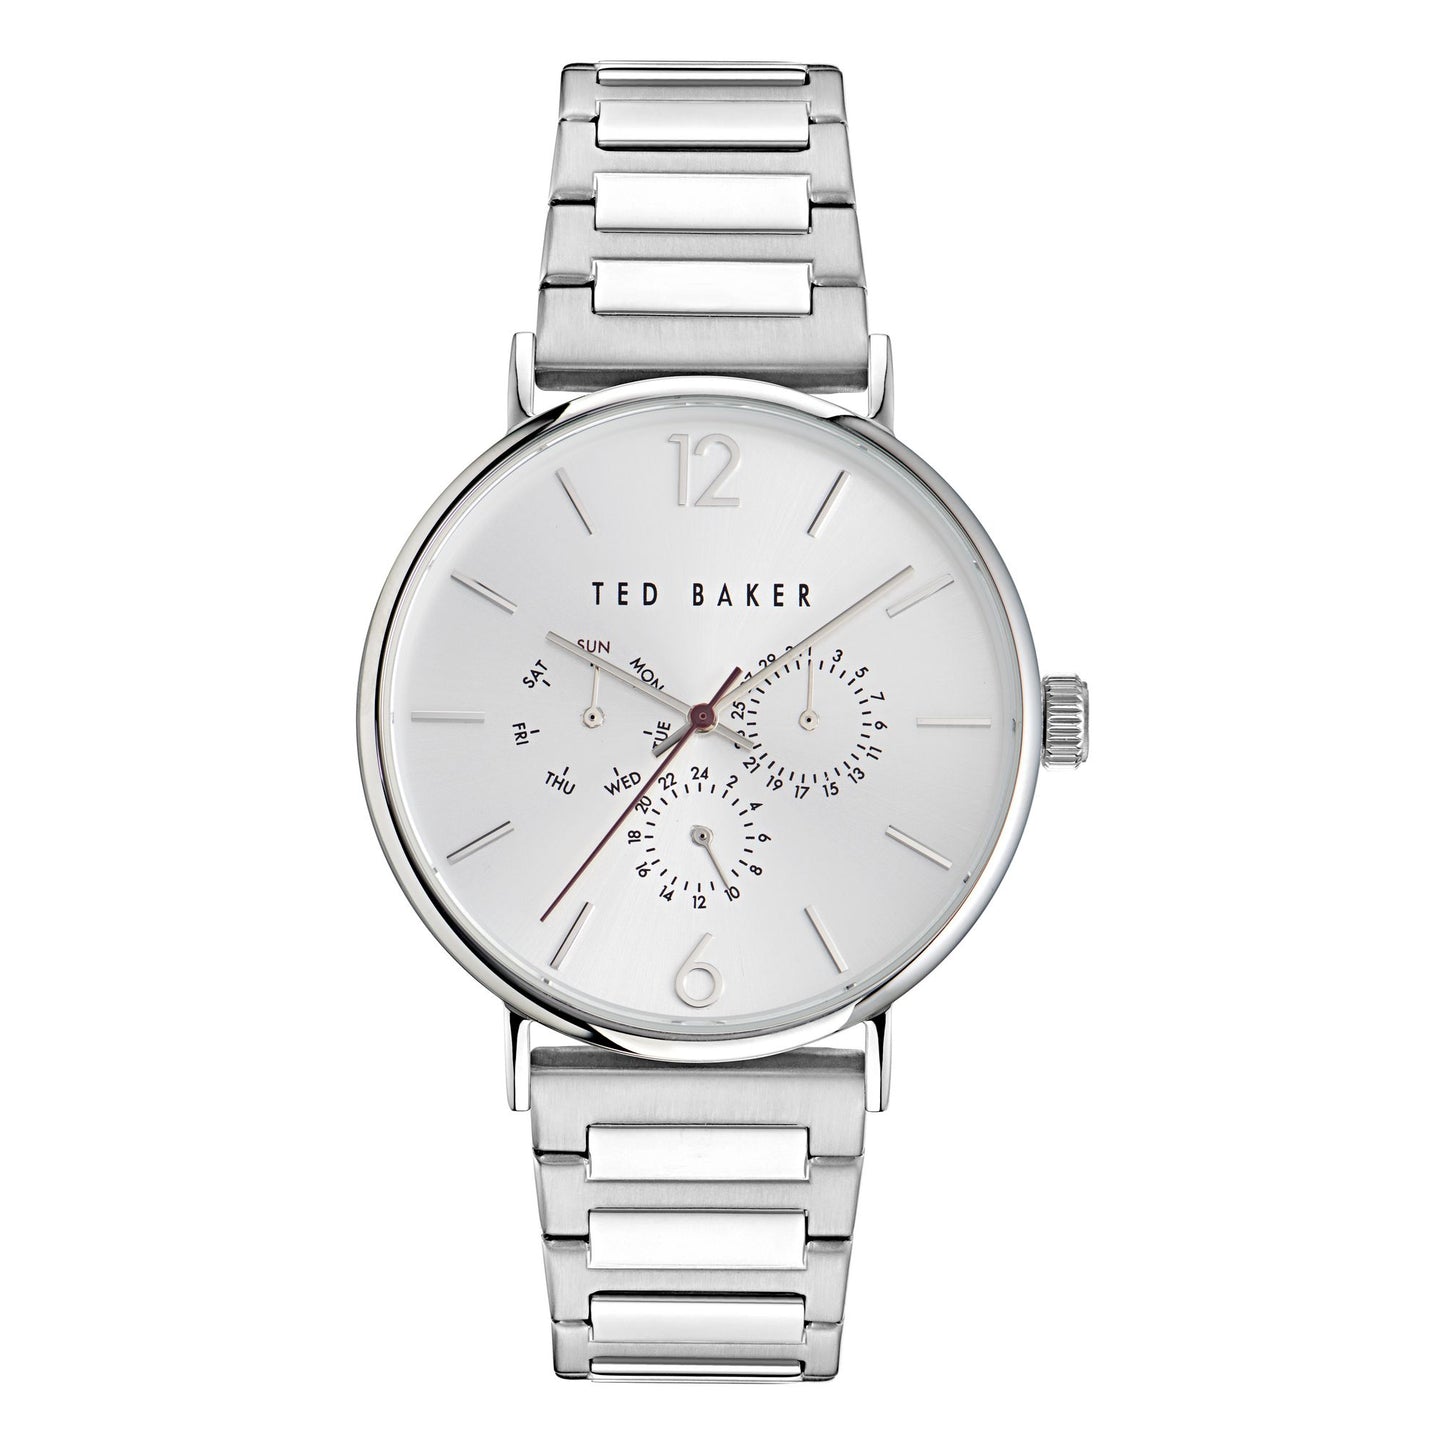 Ted Baker Silver-Tone Dial Men Watch - BKPPGF304